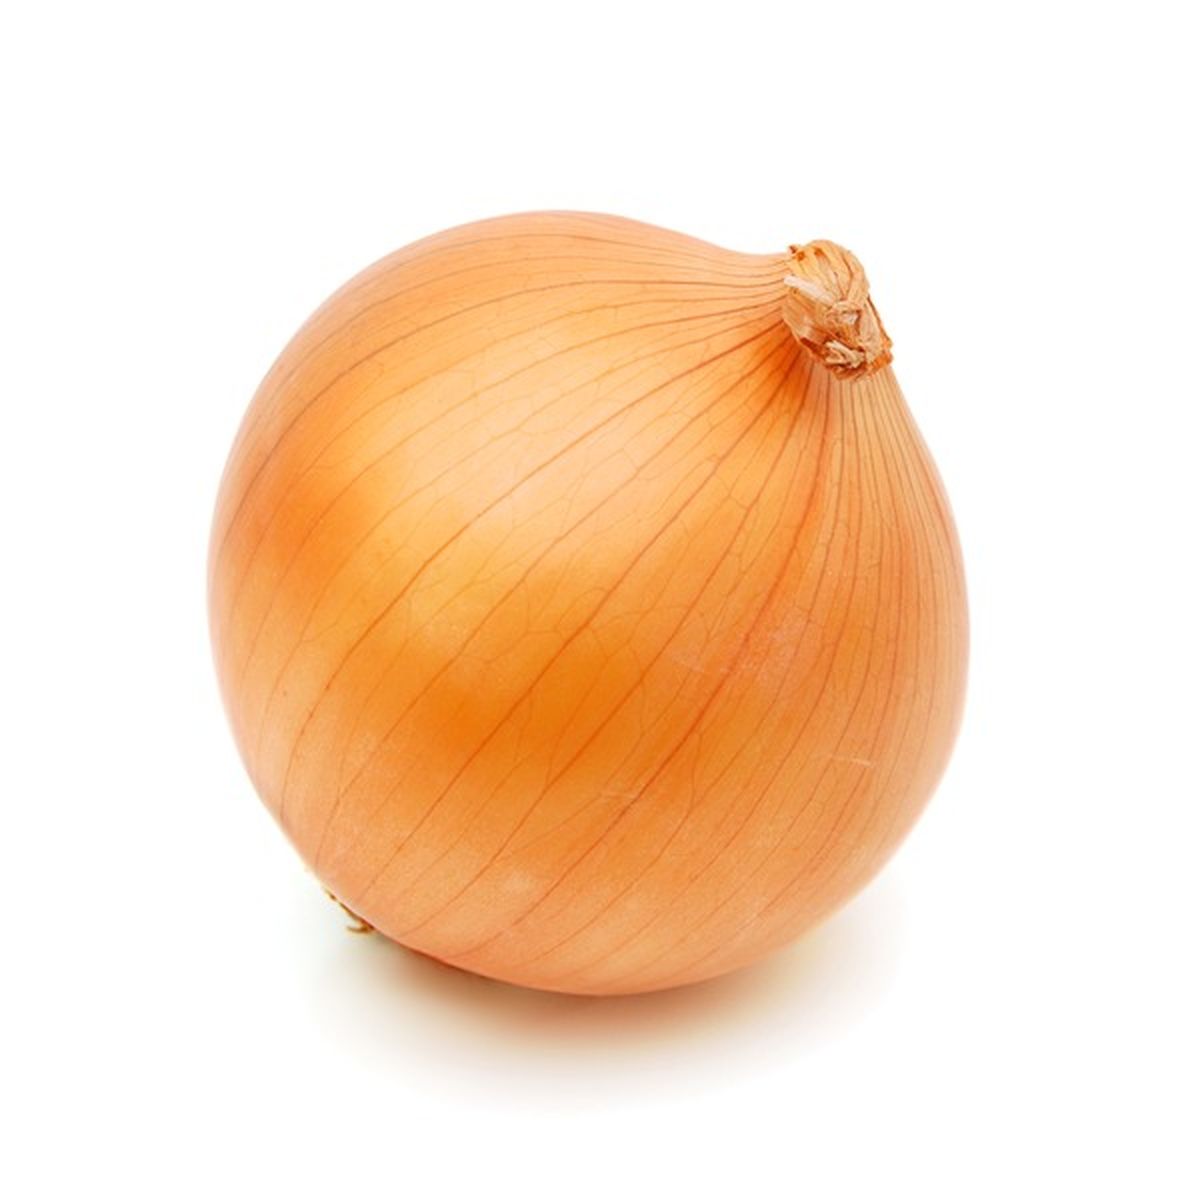 yellow onion (1 cup)